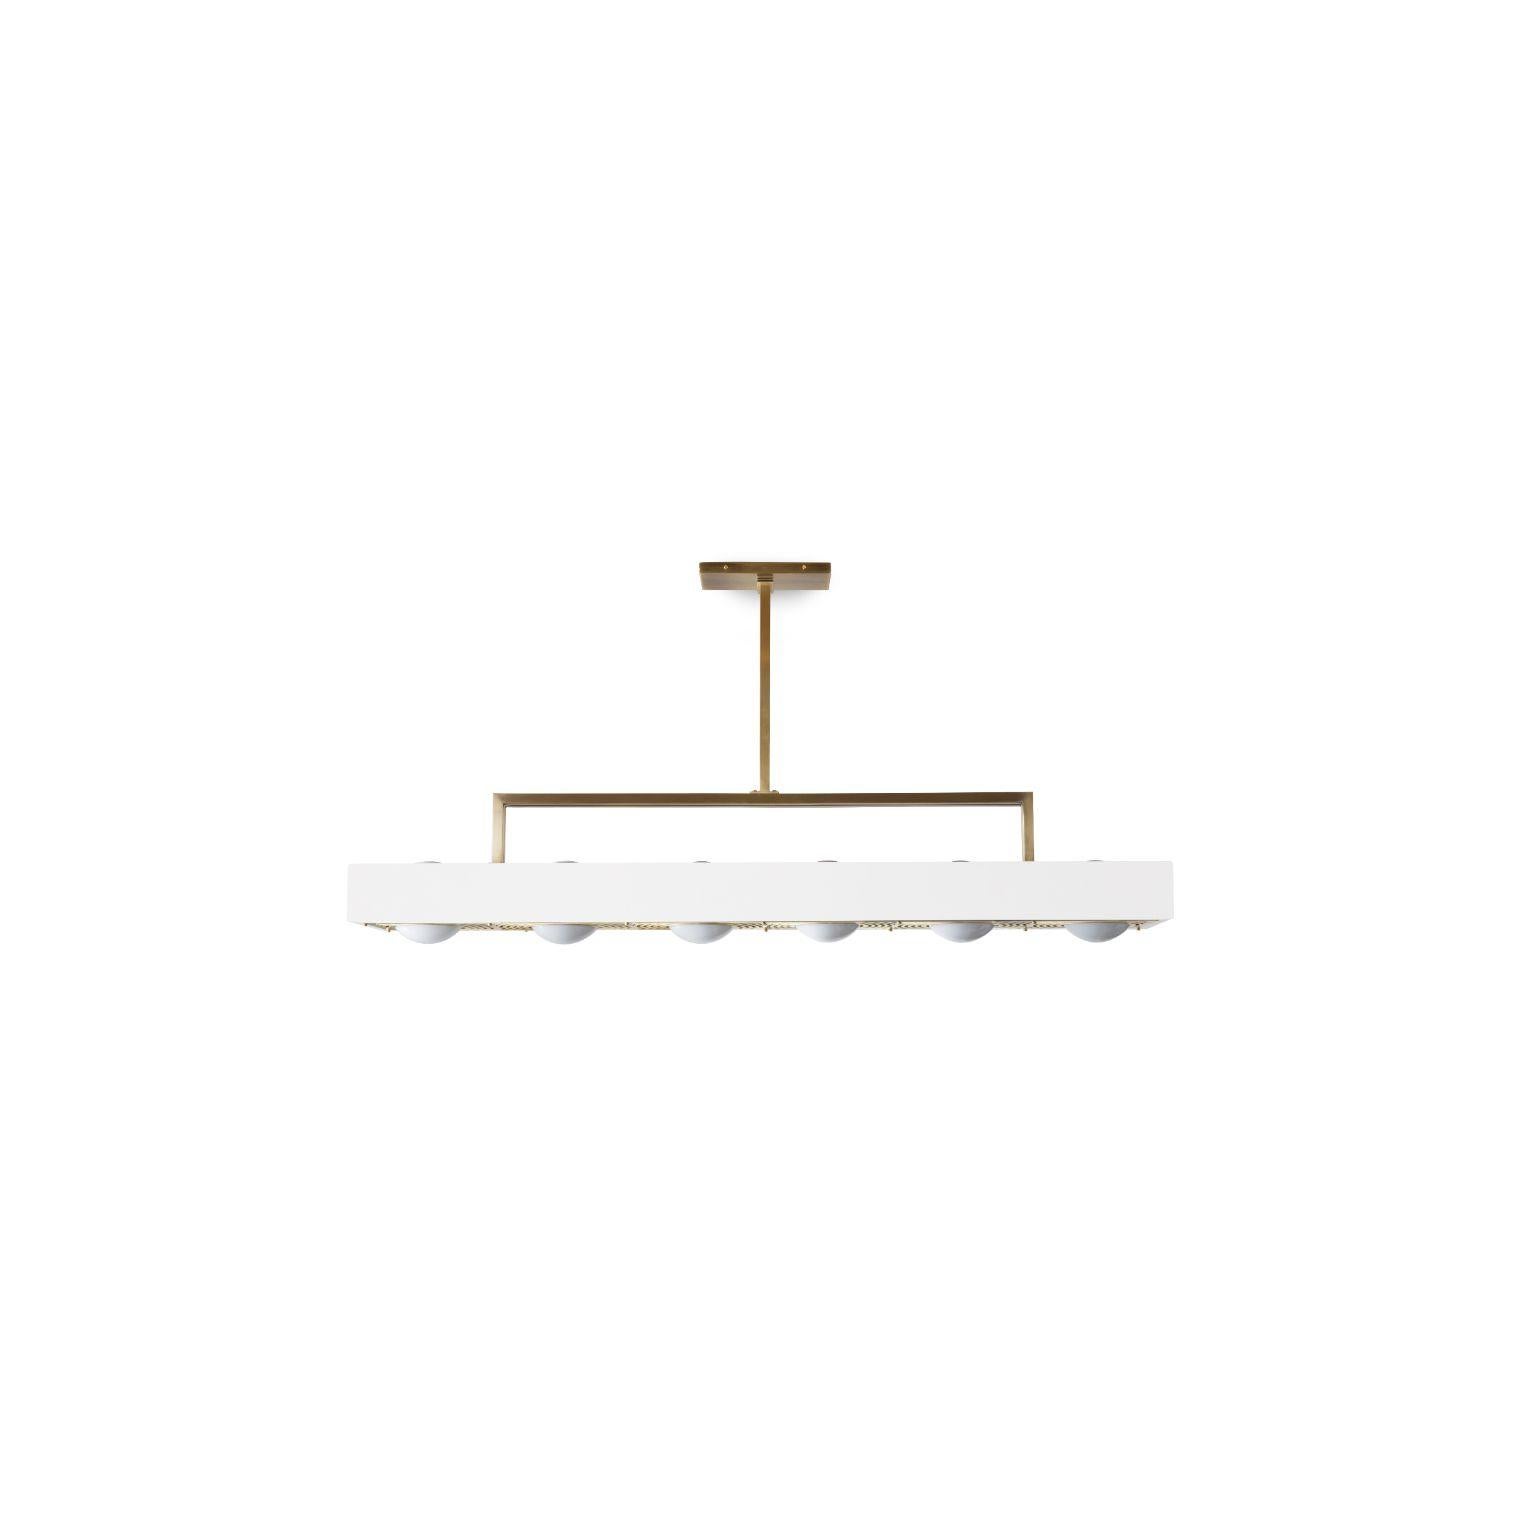 Kernel Pendant Light XL - White by Bert Frank
Dimensions: 22.6 (only lamp) x 119 x 20 cm
Materials: Brass, steel

Also Available: in black and blue.

When Adam Yeats and Robbie Llewellyn founded Bert Frank in 2013 it was a meeting of minds and